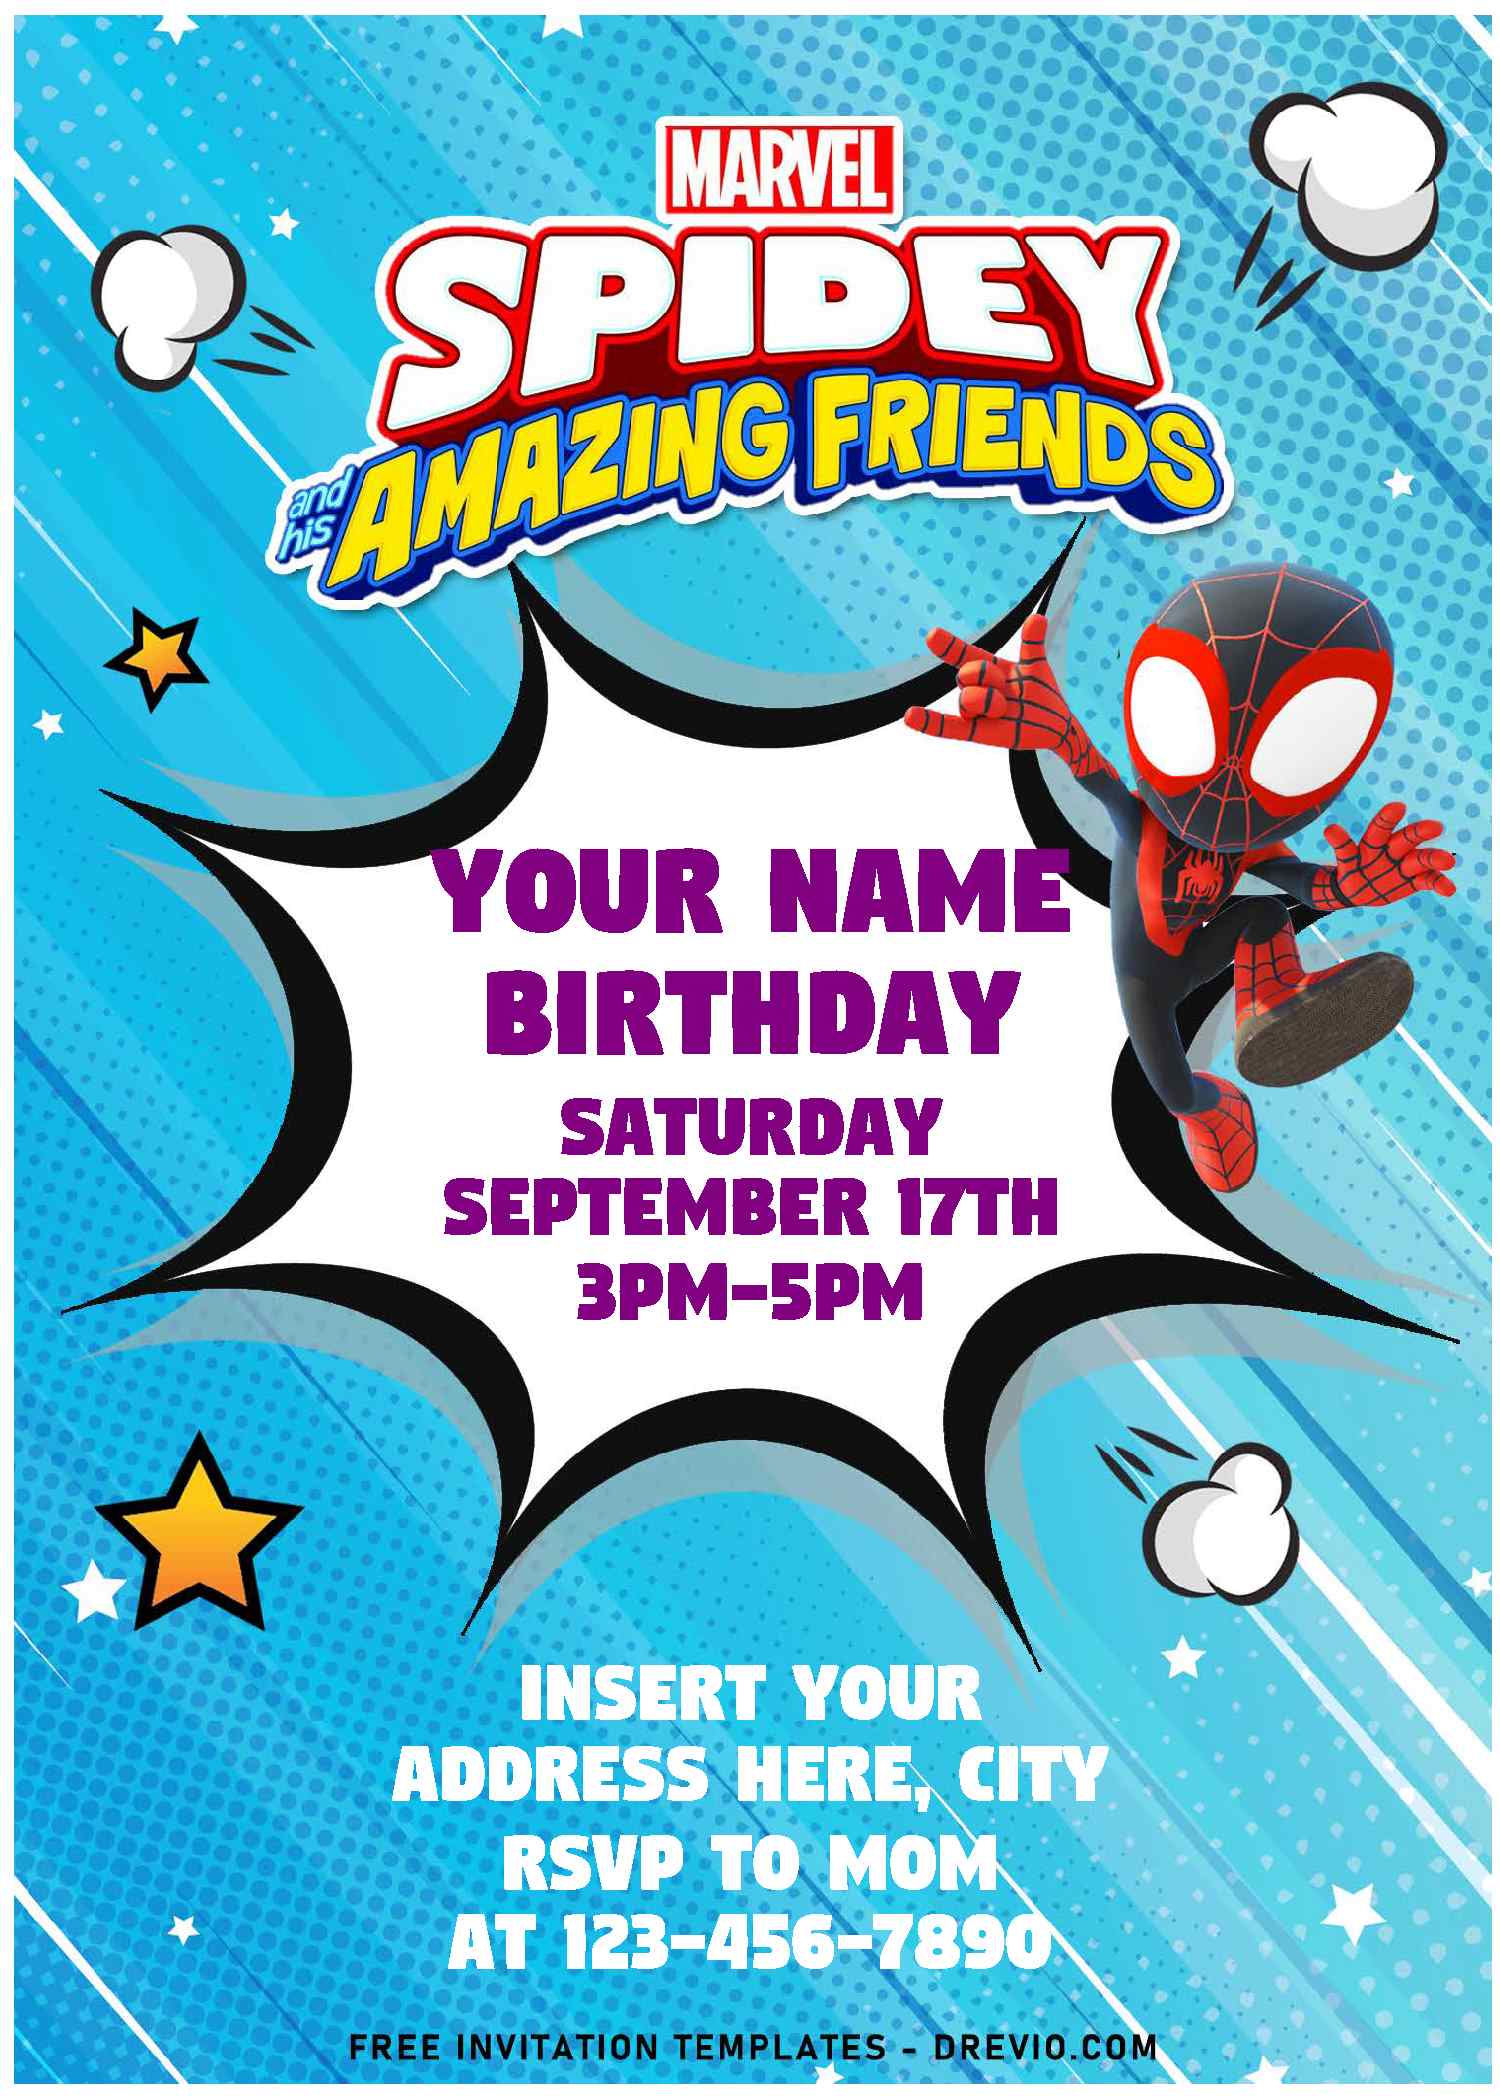 spidey-and-his-amazing-friends-invitation-template-free